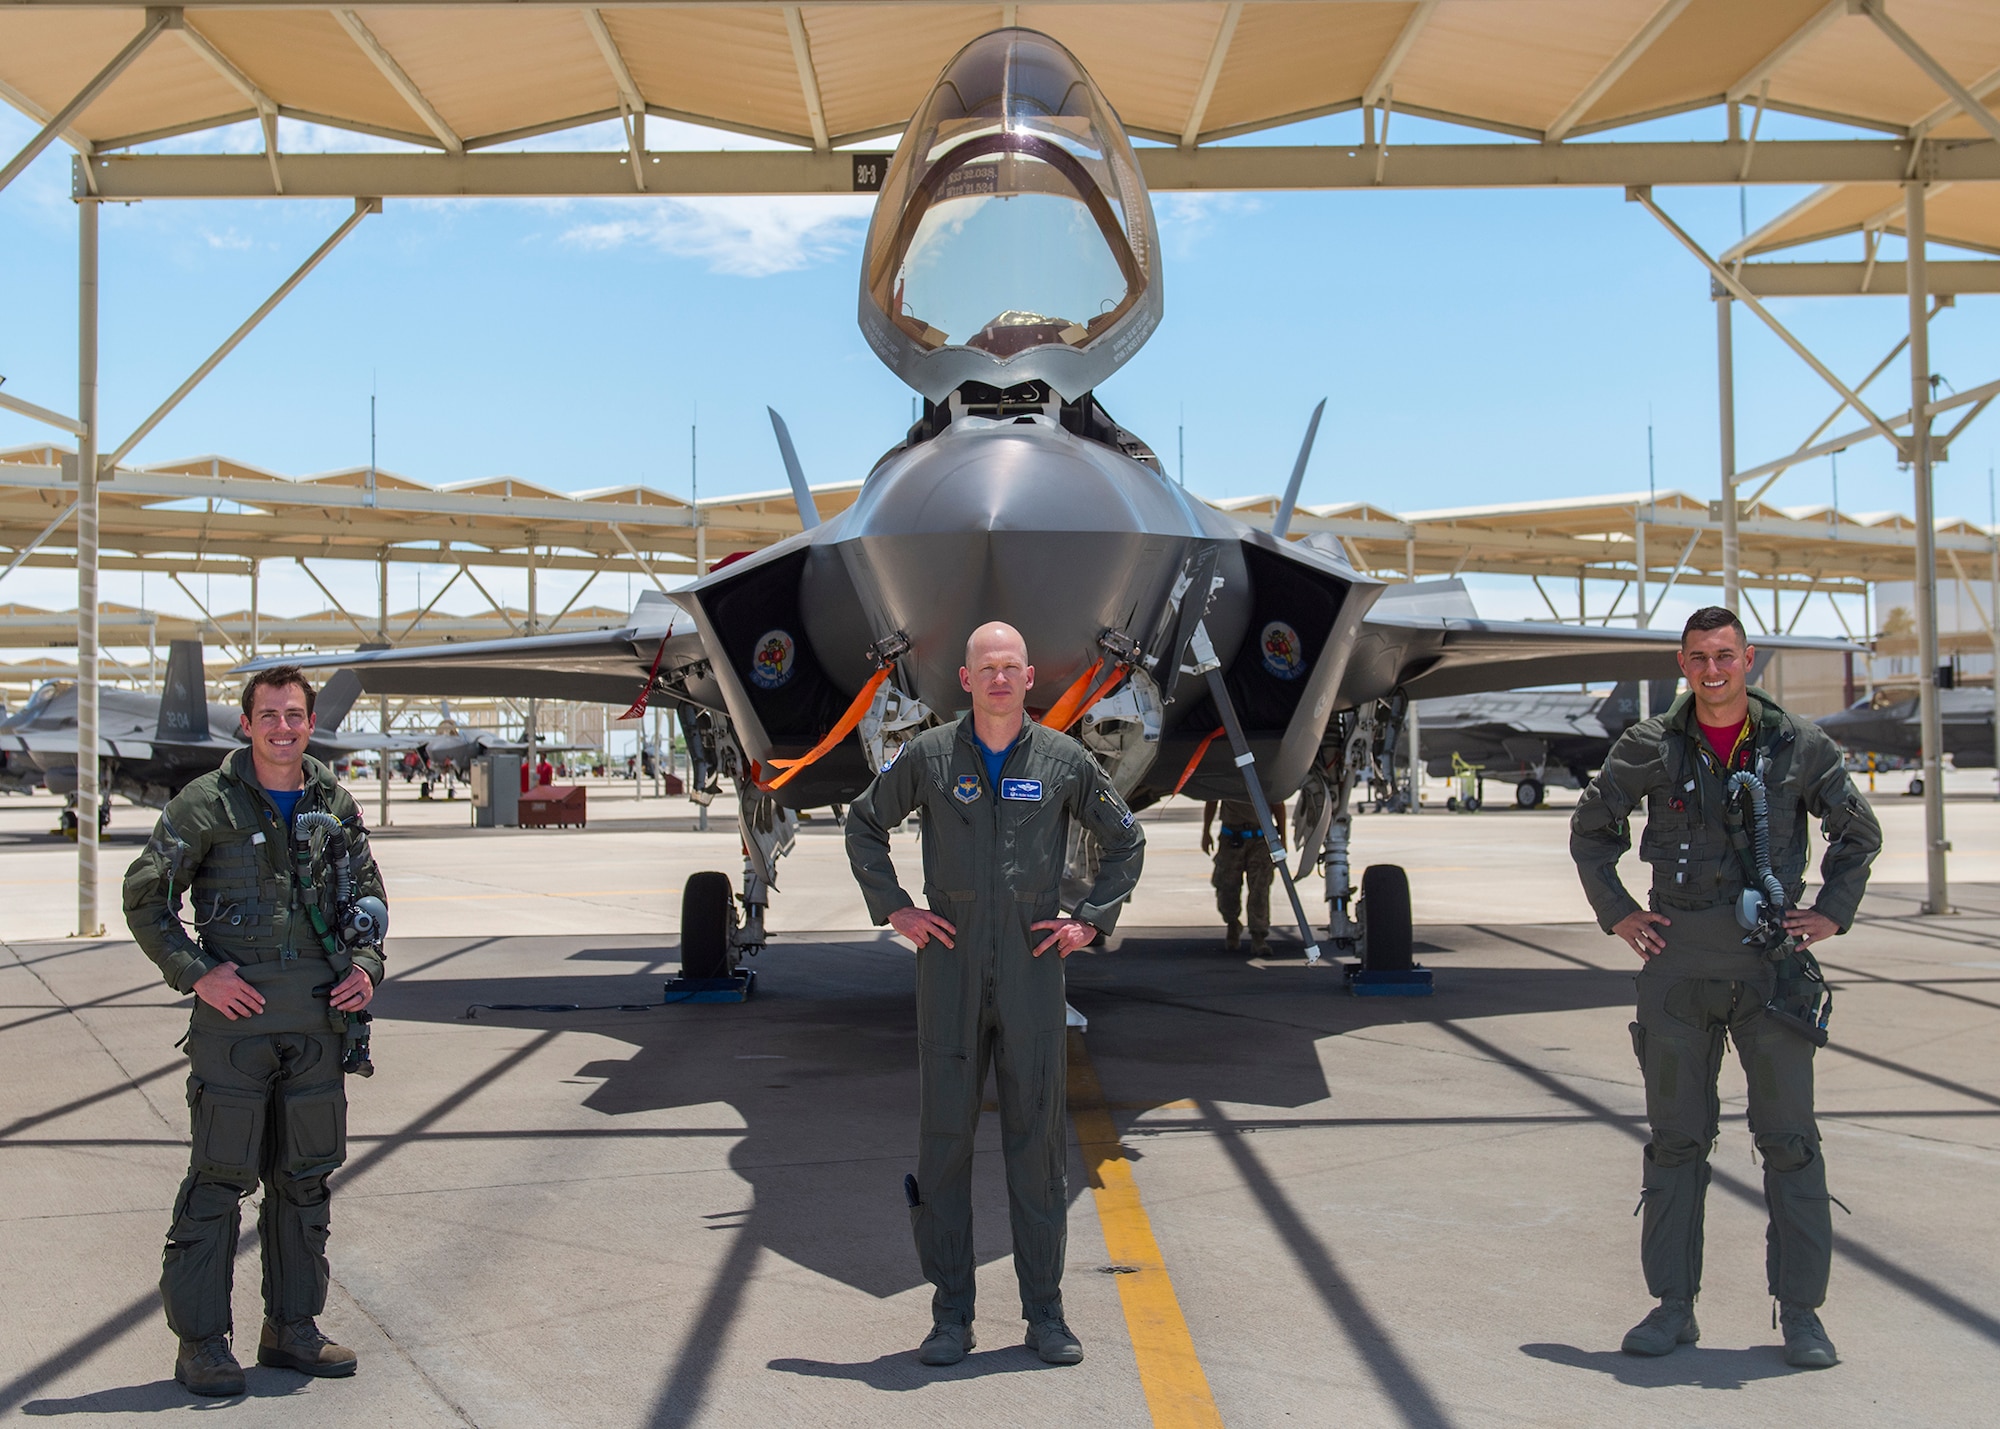 From left to right: Maj. Tyler McBride, 62nd Fighter Squadron F-35A Lightning II instructor pilot (left), Lt. Col. Chris Hubbard, 62nd Fighter Wing commander, and Capt. Justin Lennon, 56th Training Squadron F-35 instructor pilot, stand in front of an F-35 after a Pride Month flyby June 26, 2020, at Luke Air Force Base, Ariz.